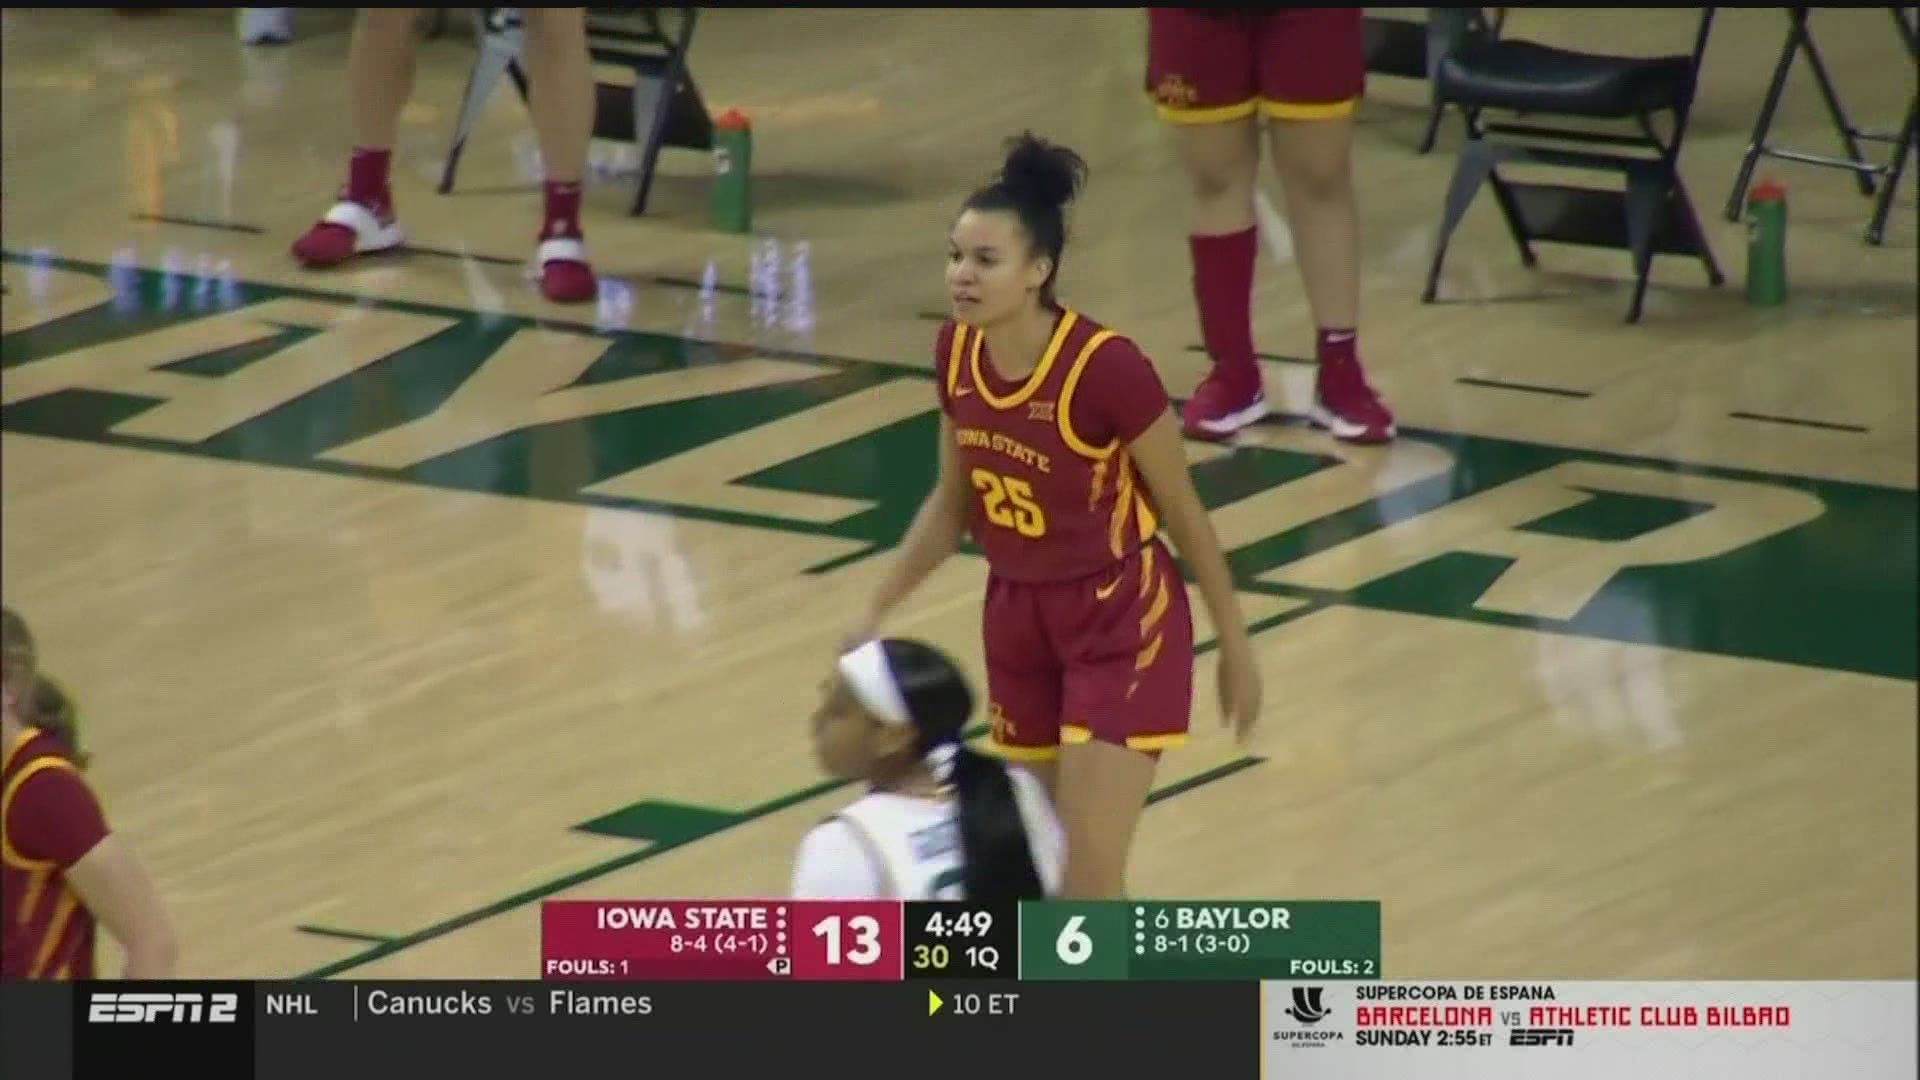 Iowa State women's basketball defeated the 6th ranked Baylor Bears team in a huge road win